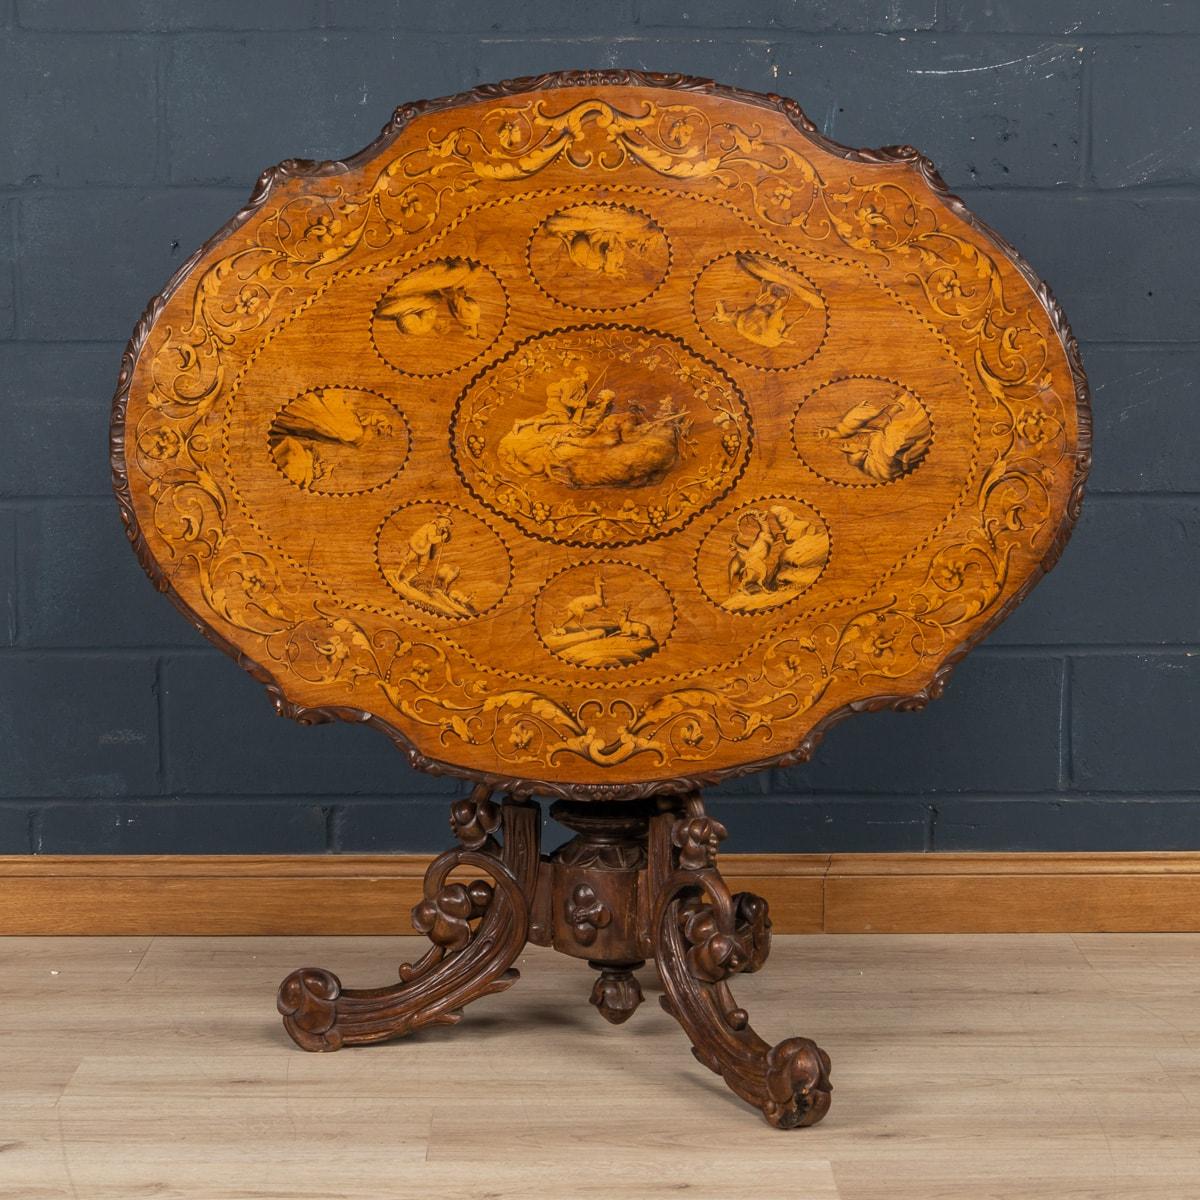 An exceptional Swiss Black Forest walnut marquetry tilt-top table The shield form table top, with a marquetry inlay presenting superb examples of original pen-work, and carved apron supported by an intricately carved tripod base. What sets this pice